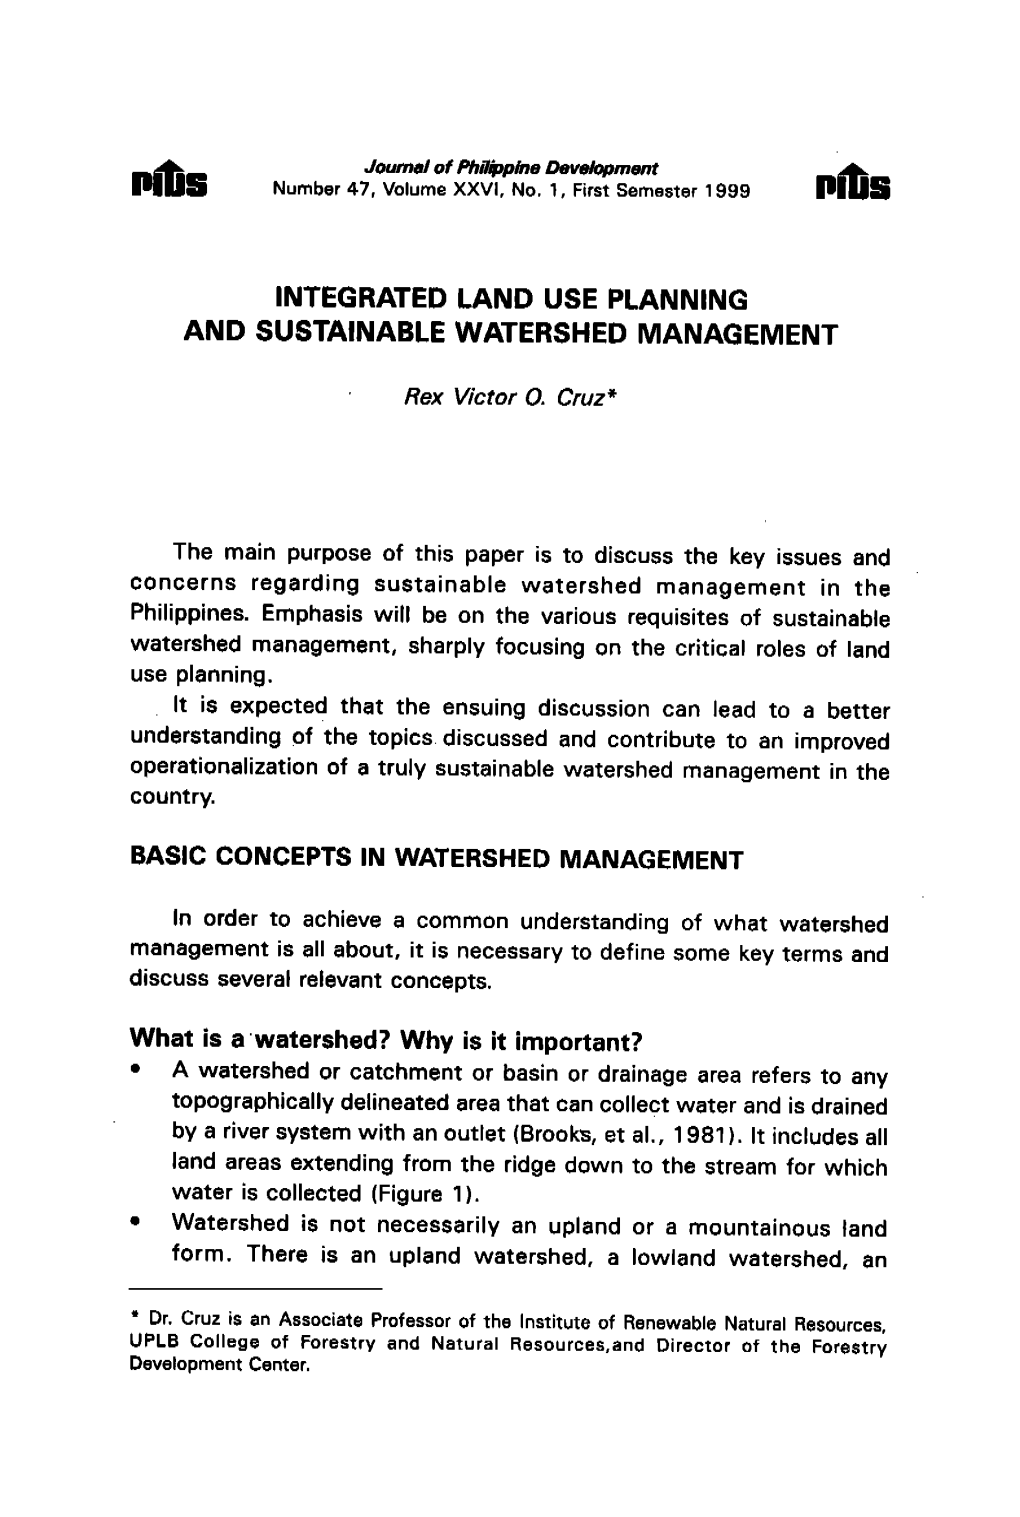 Integrated Land Use Planning and Sustainable Watershed Management